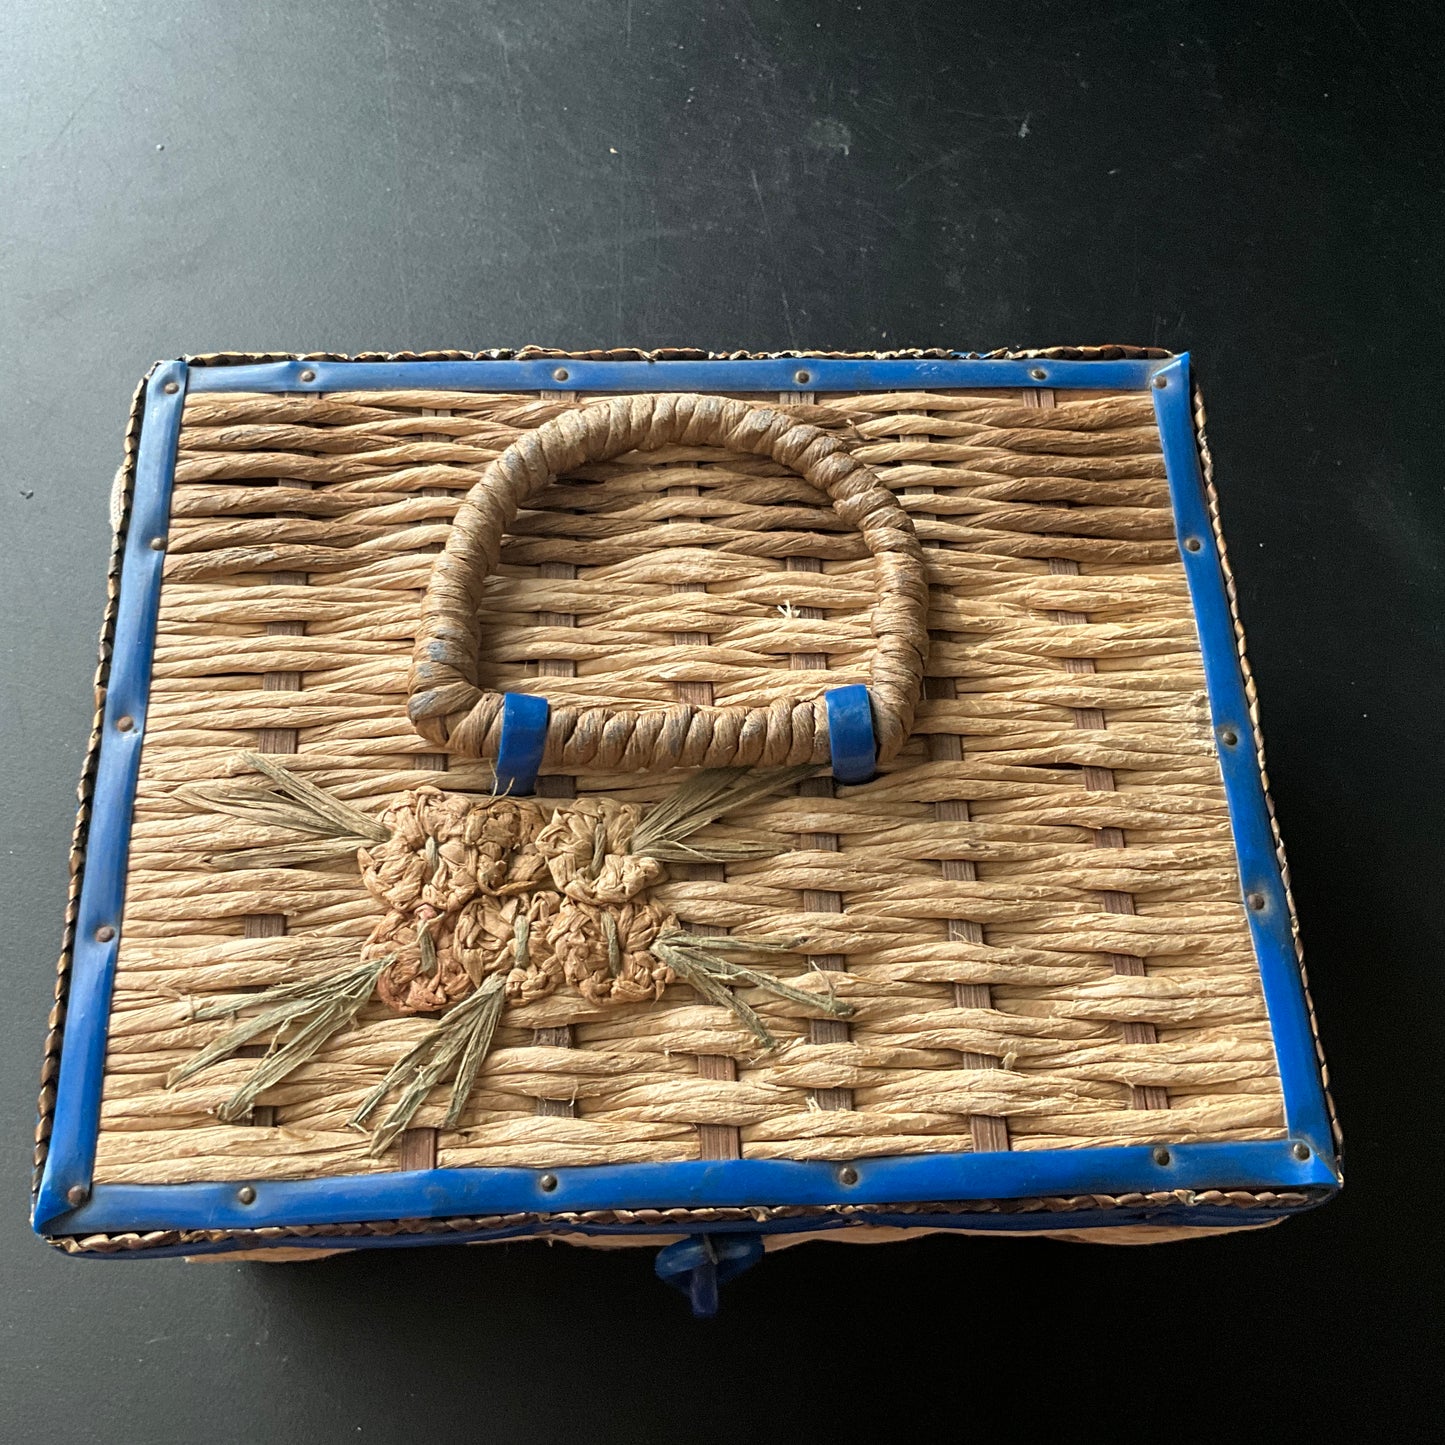 Wonderful wicker small sewing basket vintage collectible sewing notion